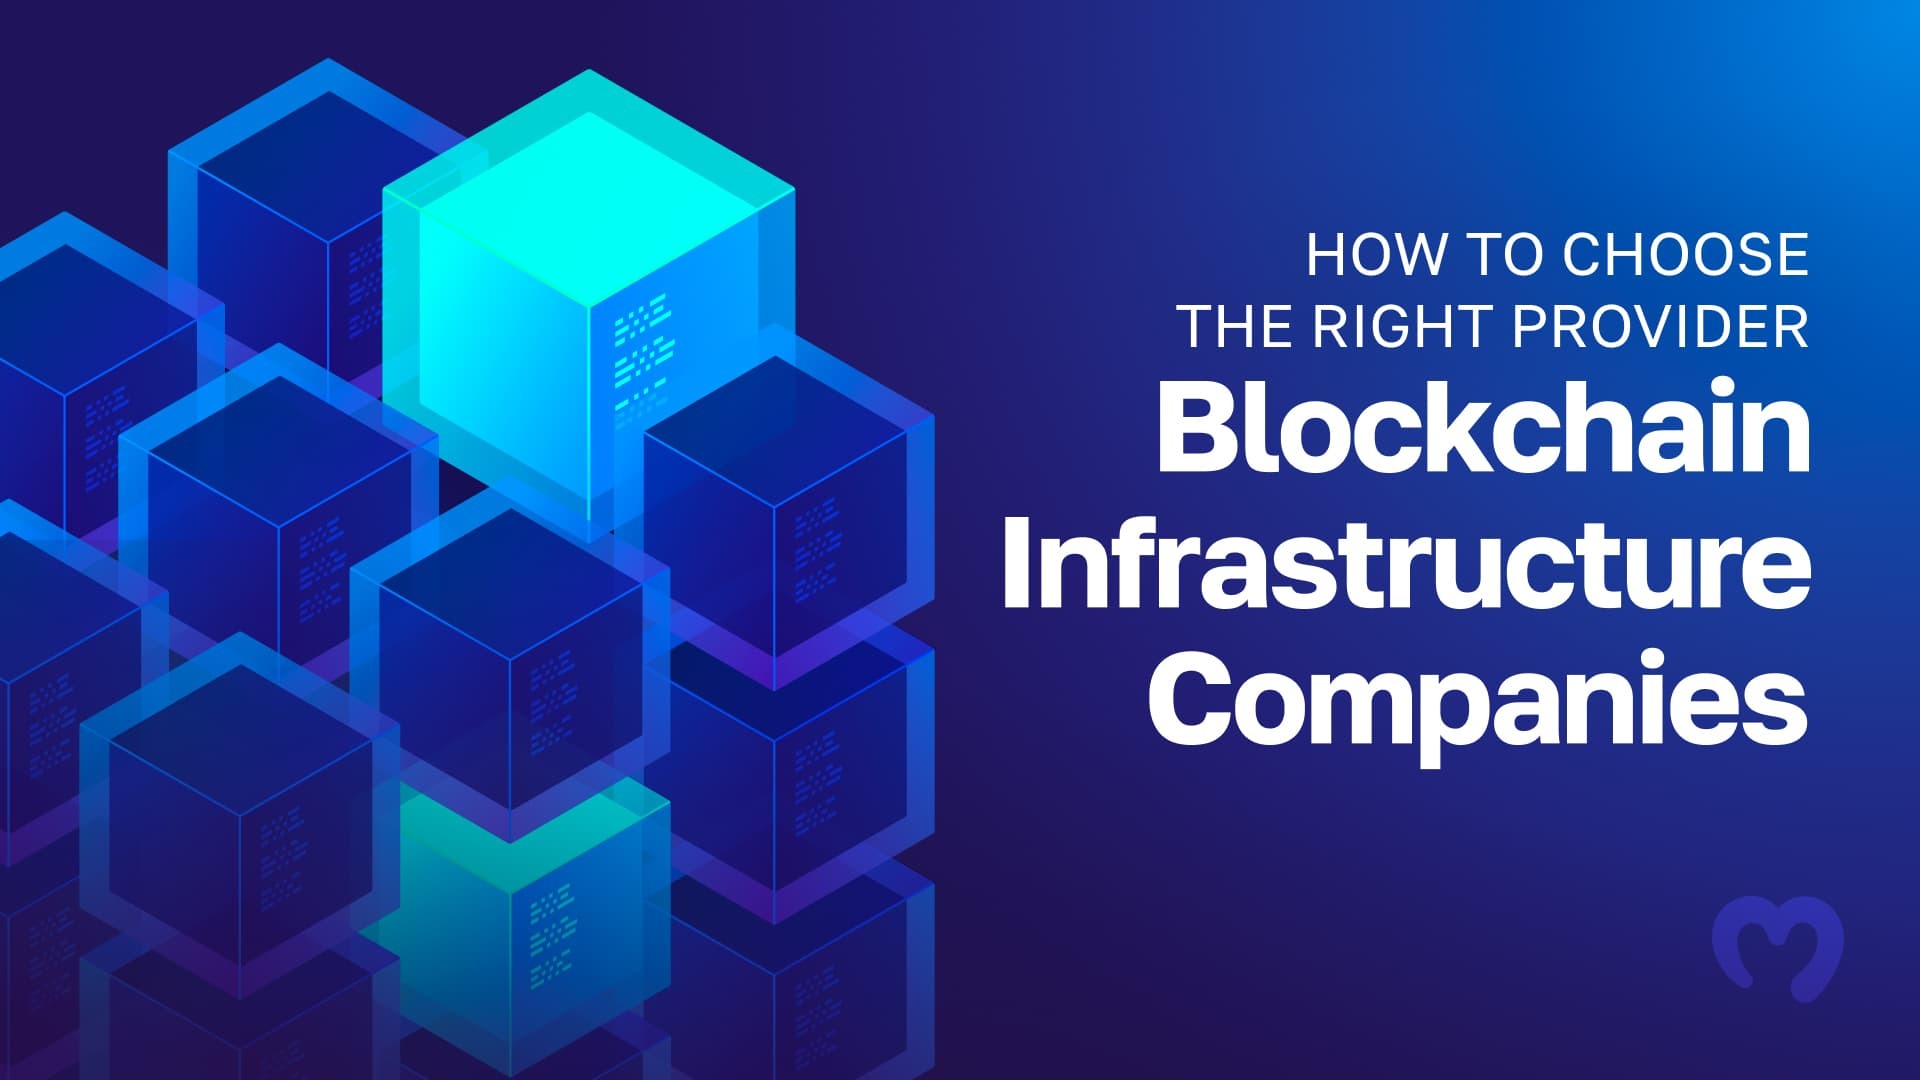 Connected blocks representing companies within blockchain infrastructure.